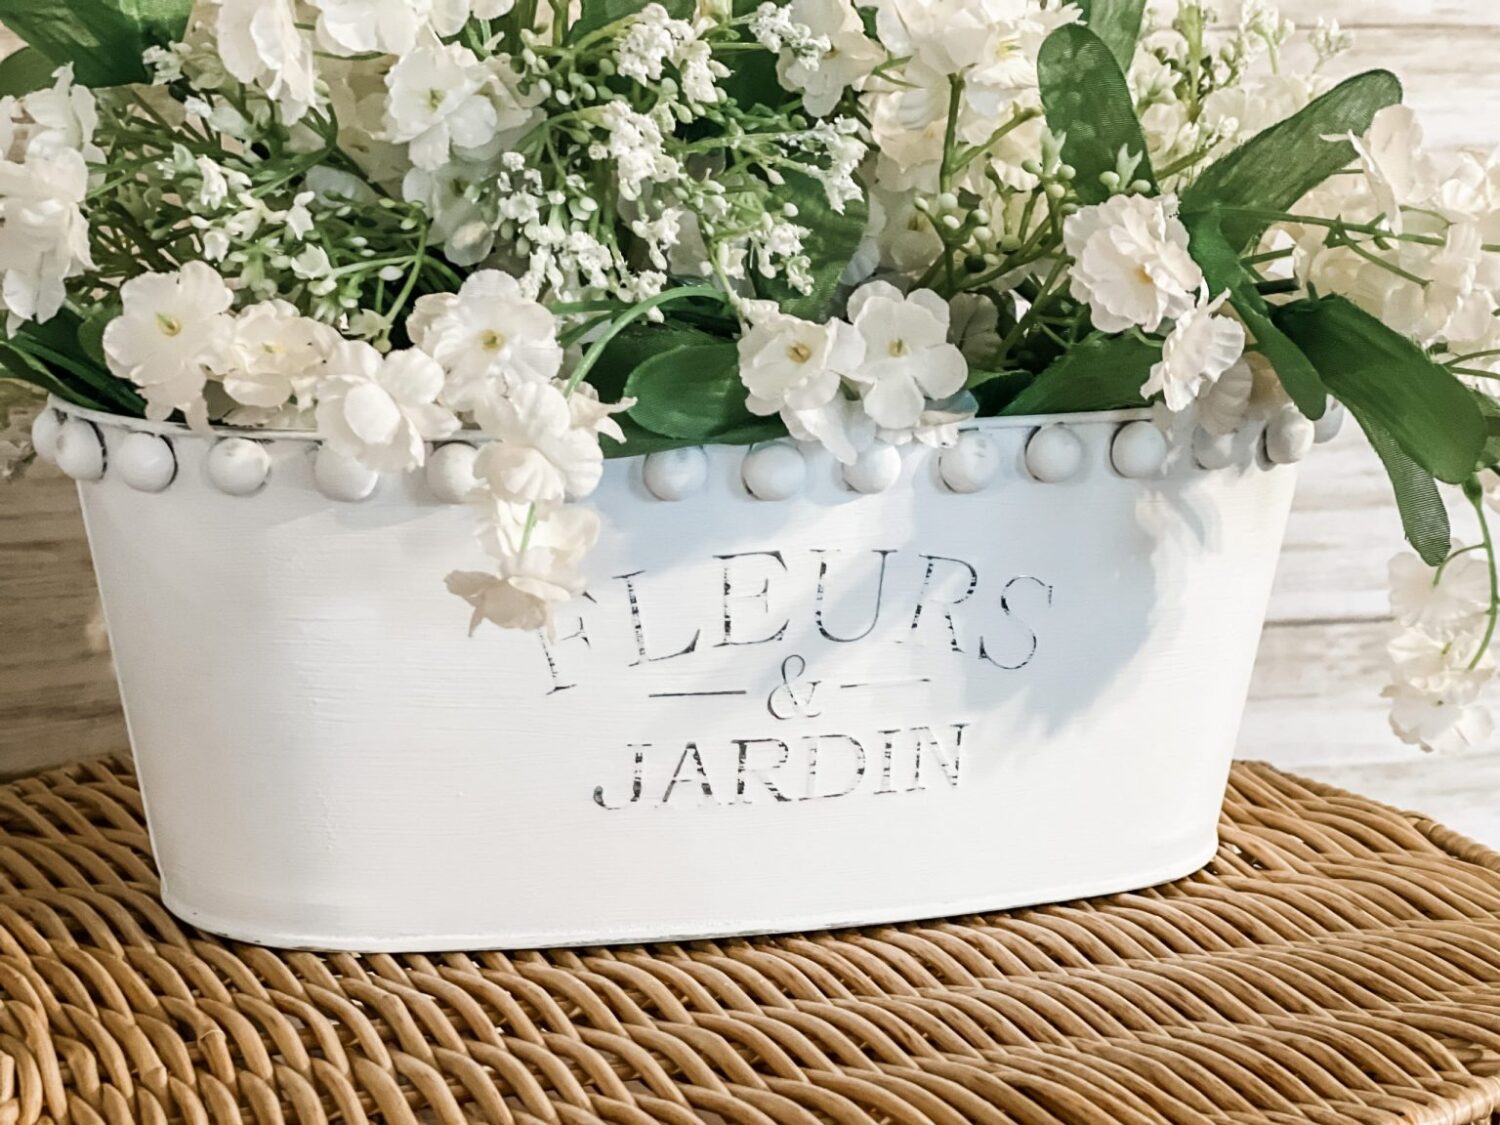 DIY Dollar Tree farmhouse planter.  A silver bin with white chalk paint and beads glued around the top edge, filled with flowers.